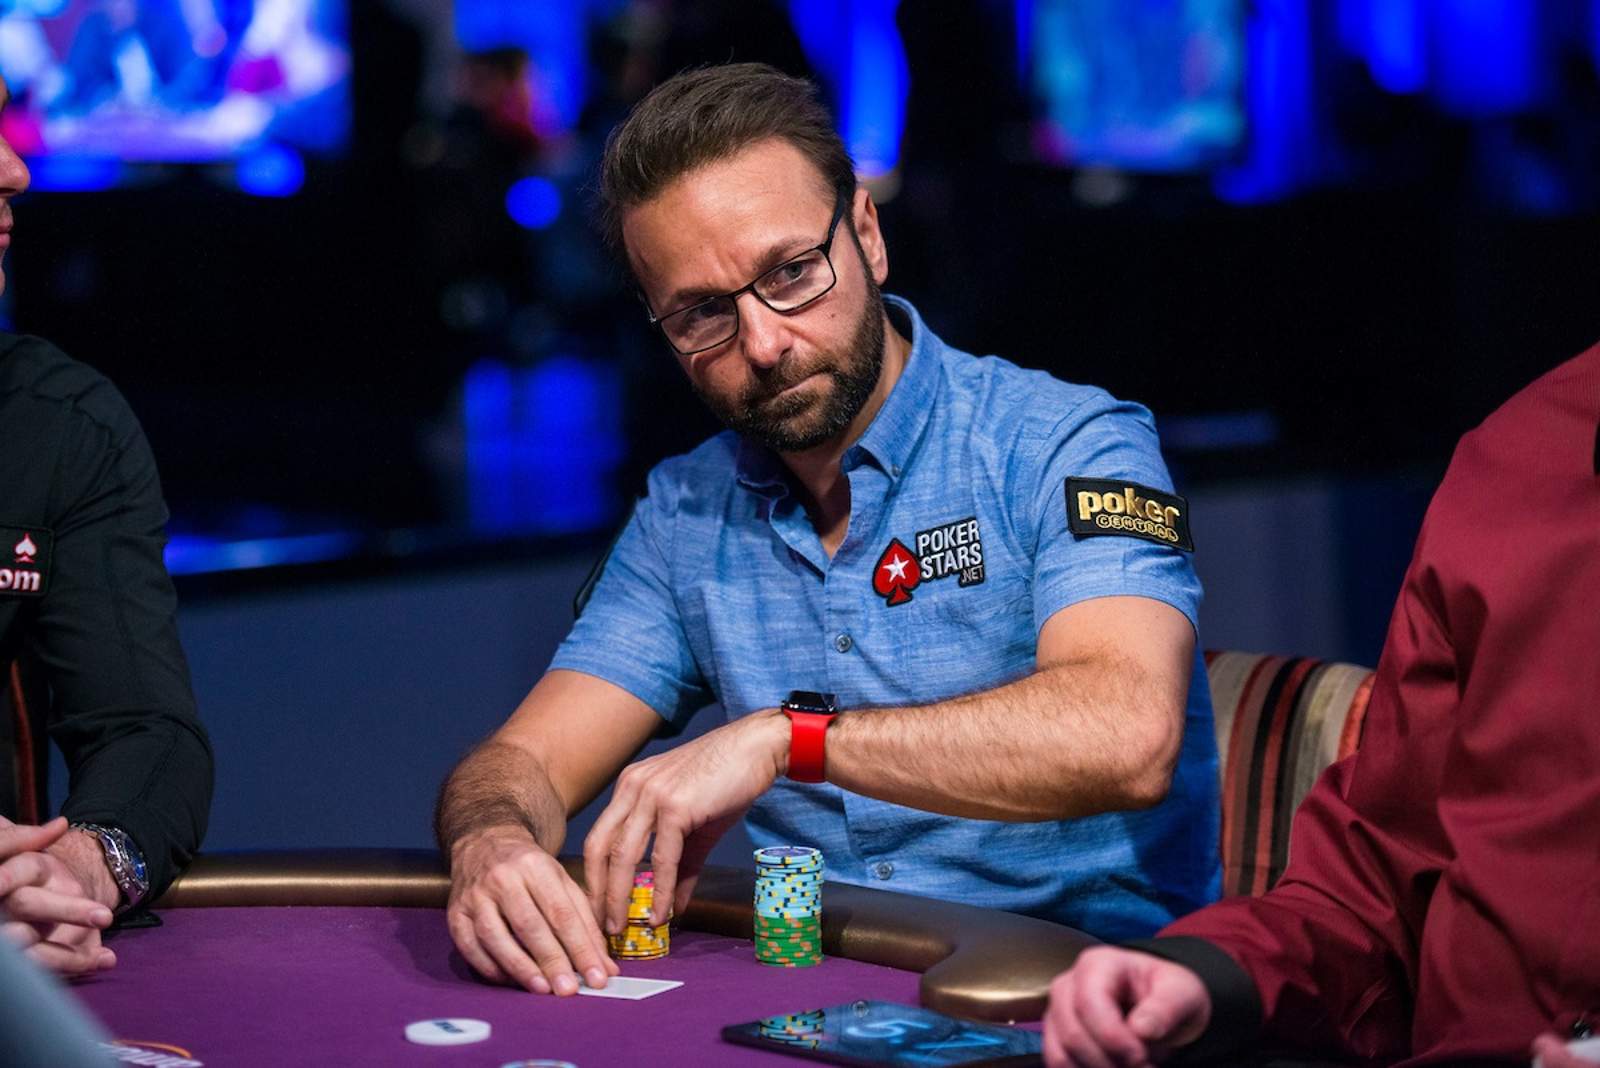 Daniel Negreanu Begins Day 3 of SHR Bowl on Feature Table